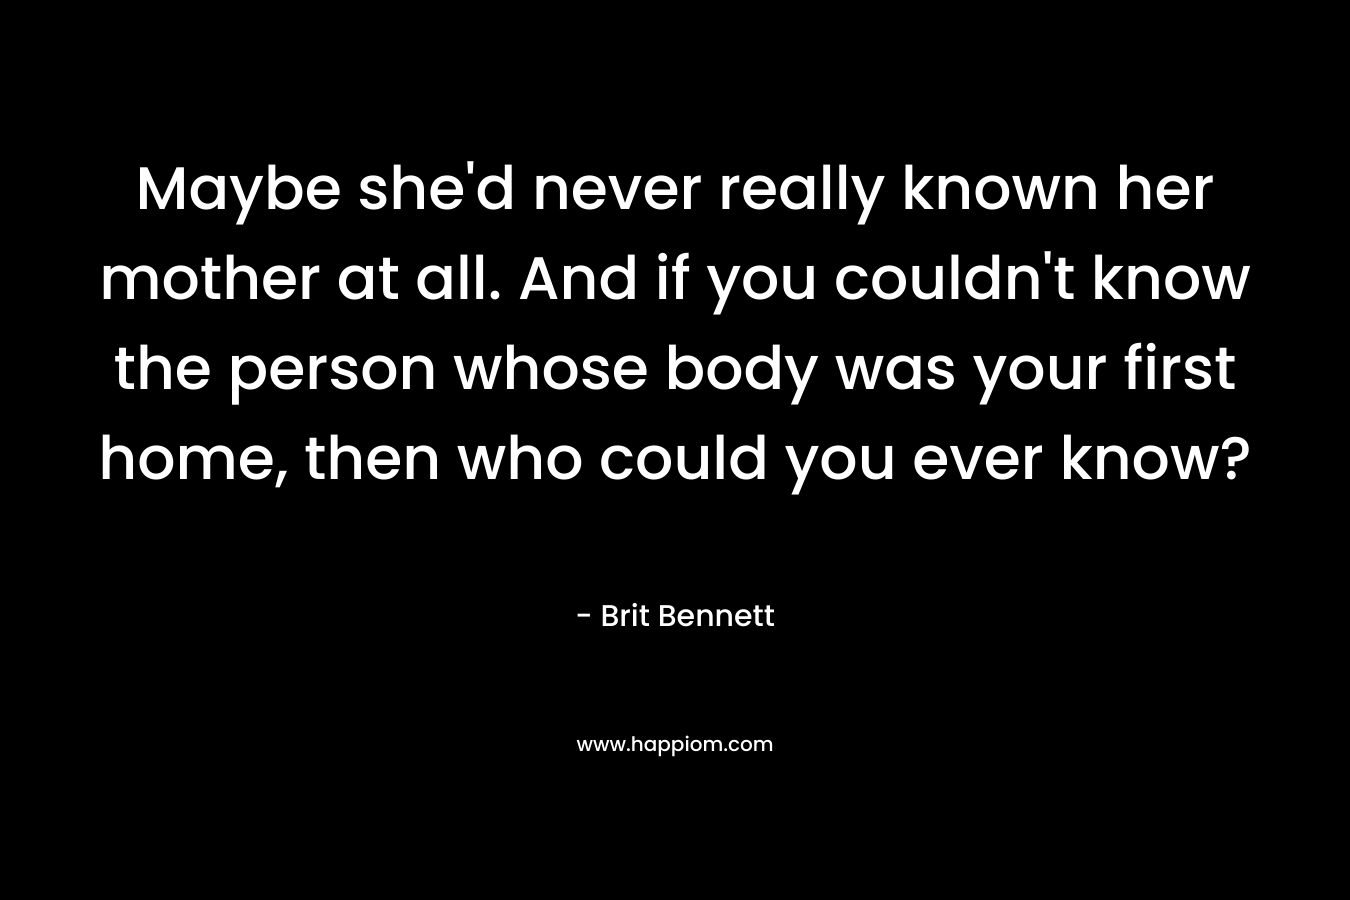 Maybe she’d never really known her mother at all. And if you couldn’t know the person whose body was your first home, then who could you ever know? – Brit Bennett